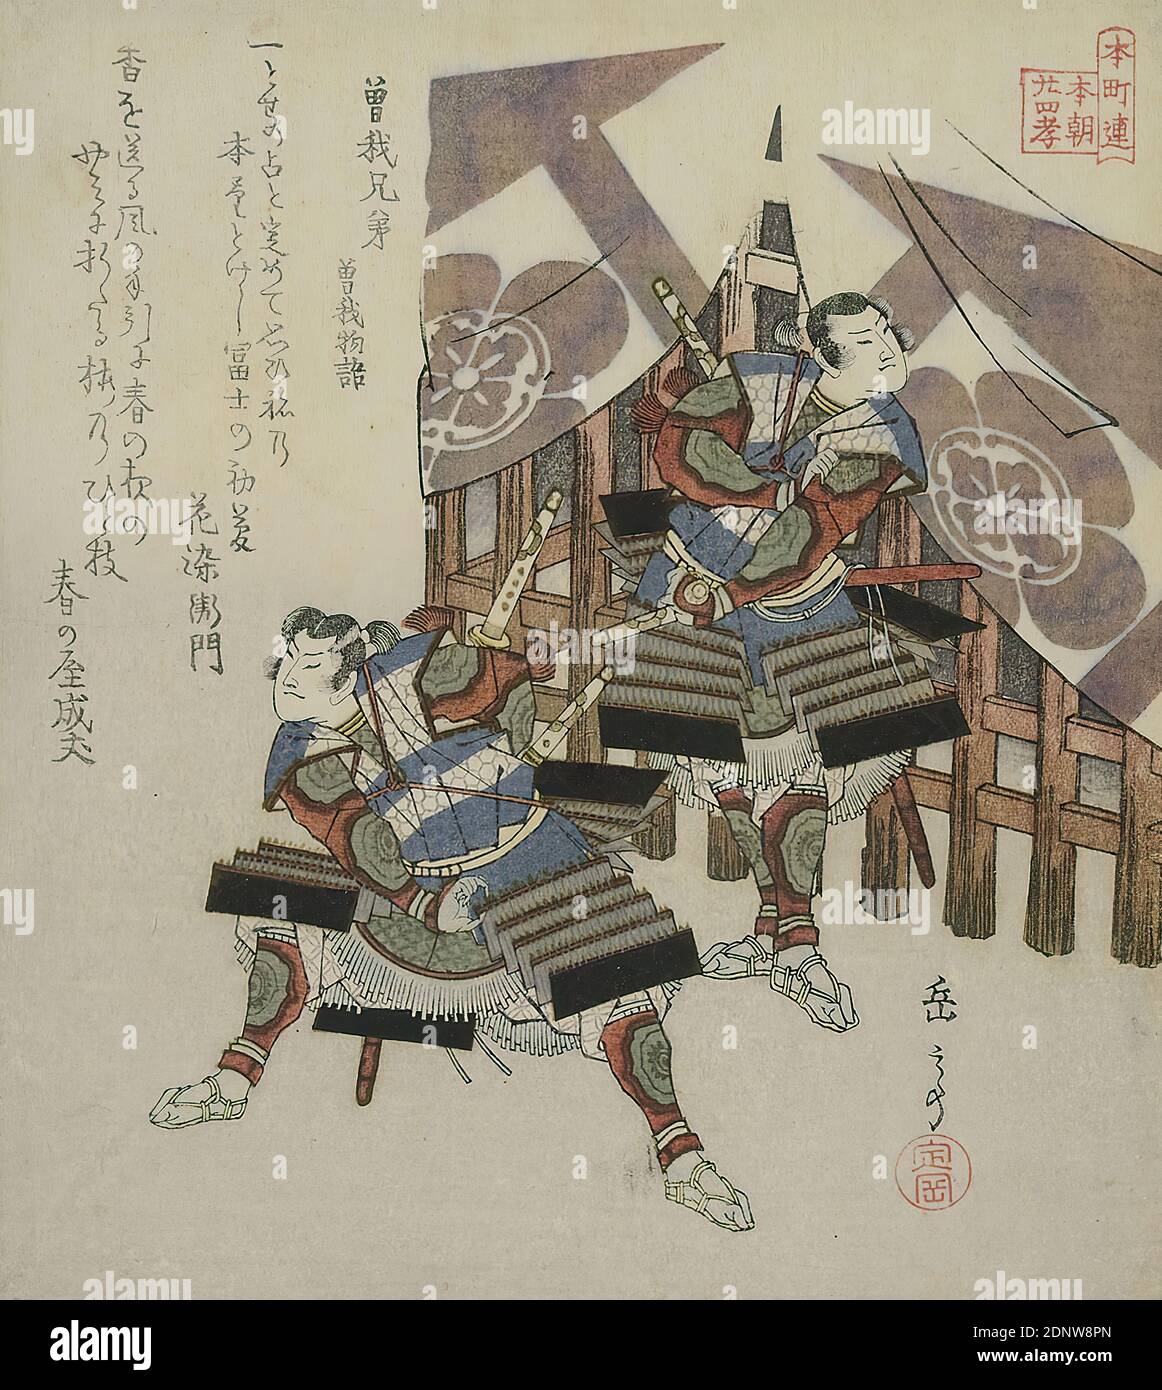 Yashima Gakutei, The Soga Brothers, from the series: 24 examples of reverence towards parents from Japan, color woodblock print, Total: Height: 20,80 cm; Width: 18,50 cm, signed: Signature: Gakutei 岳てい, prints, printed matter, brothers, soldier/soldier's life, Edo period Stock Photo